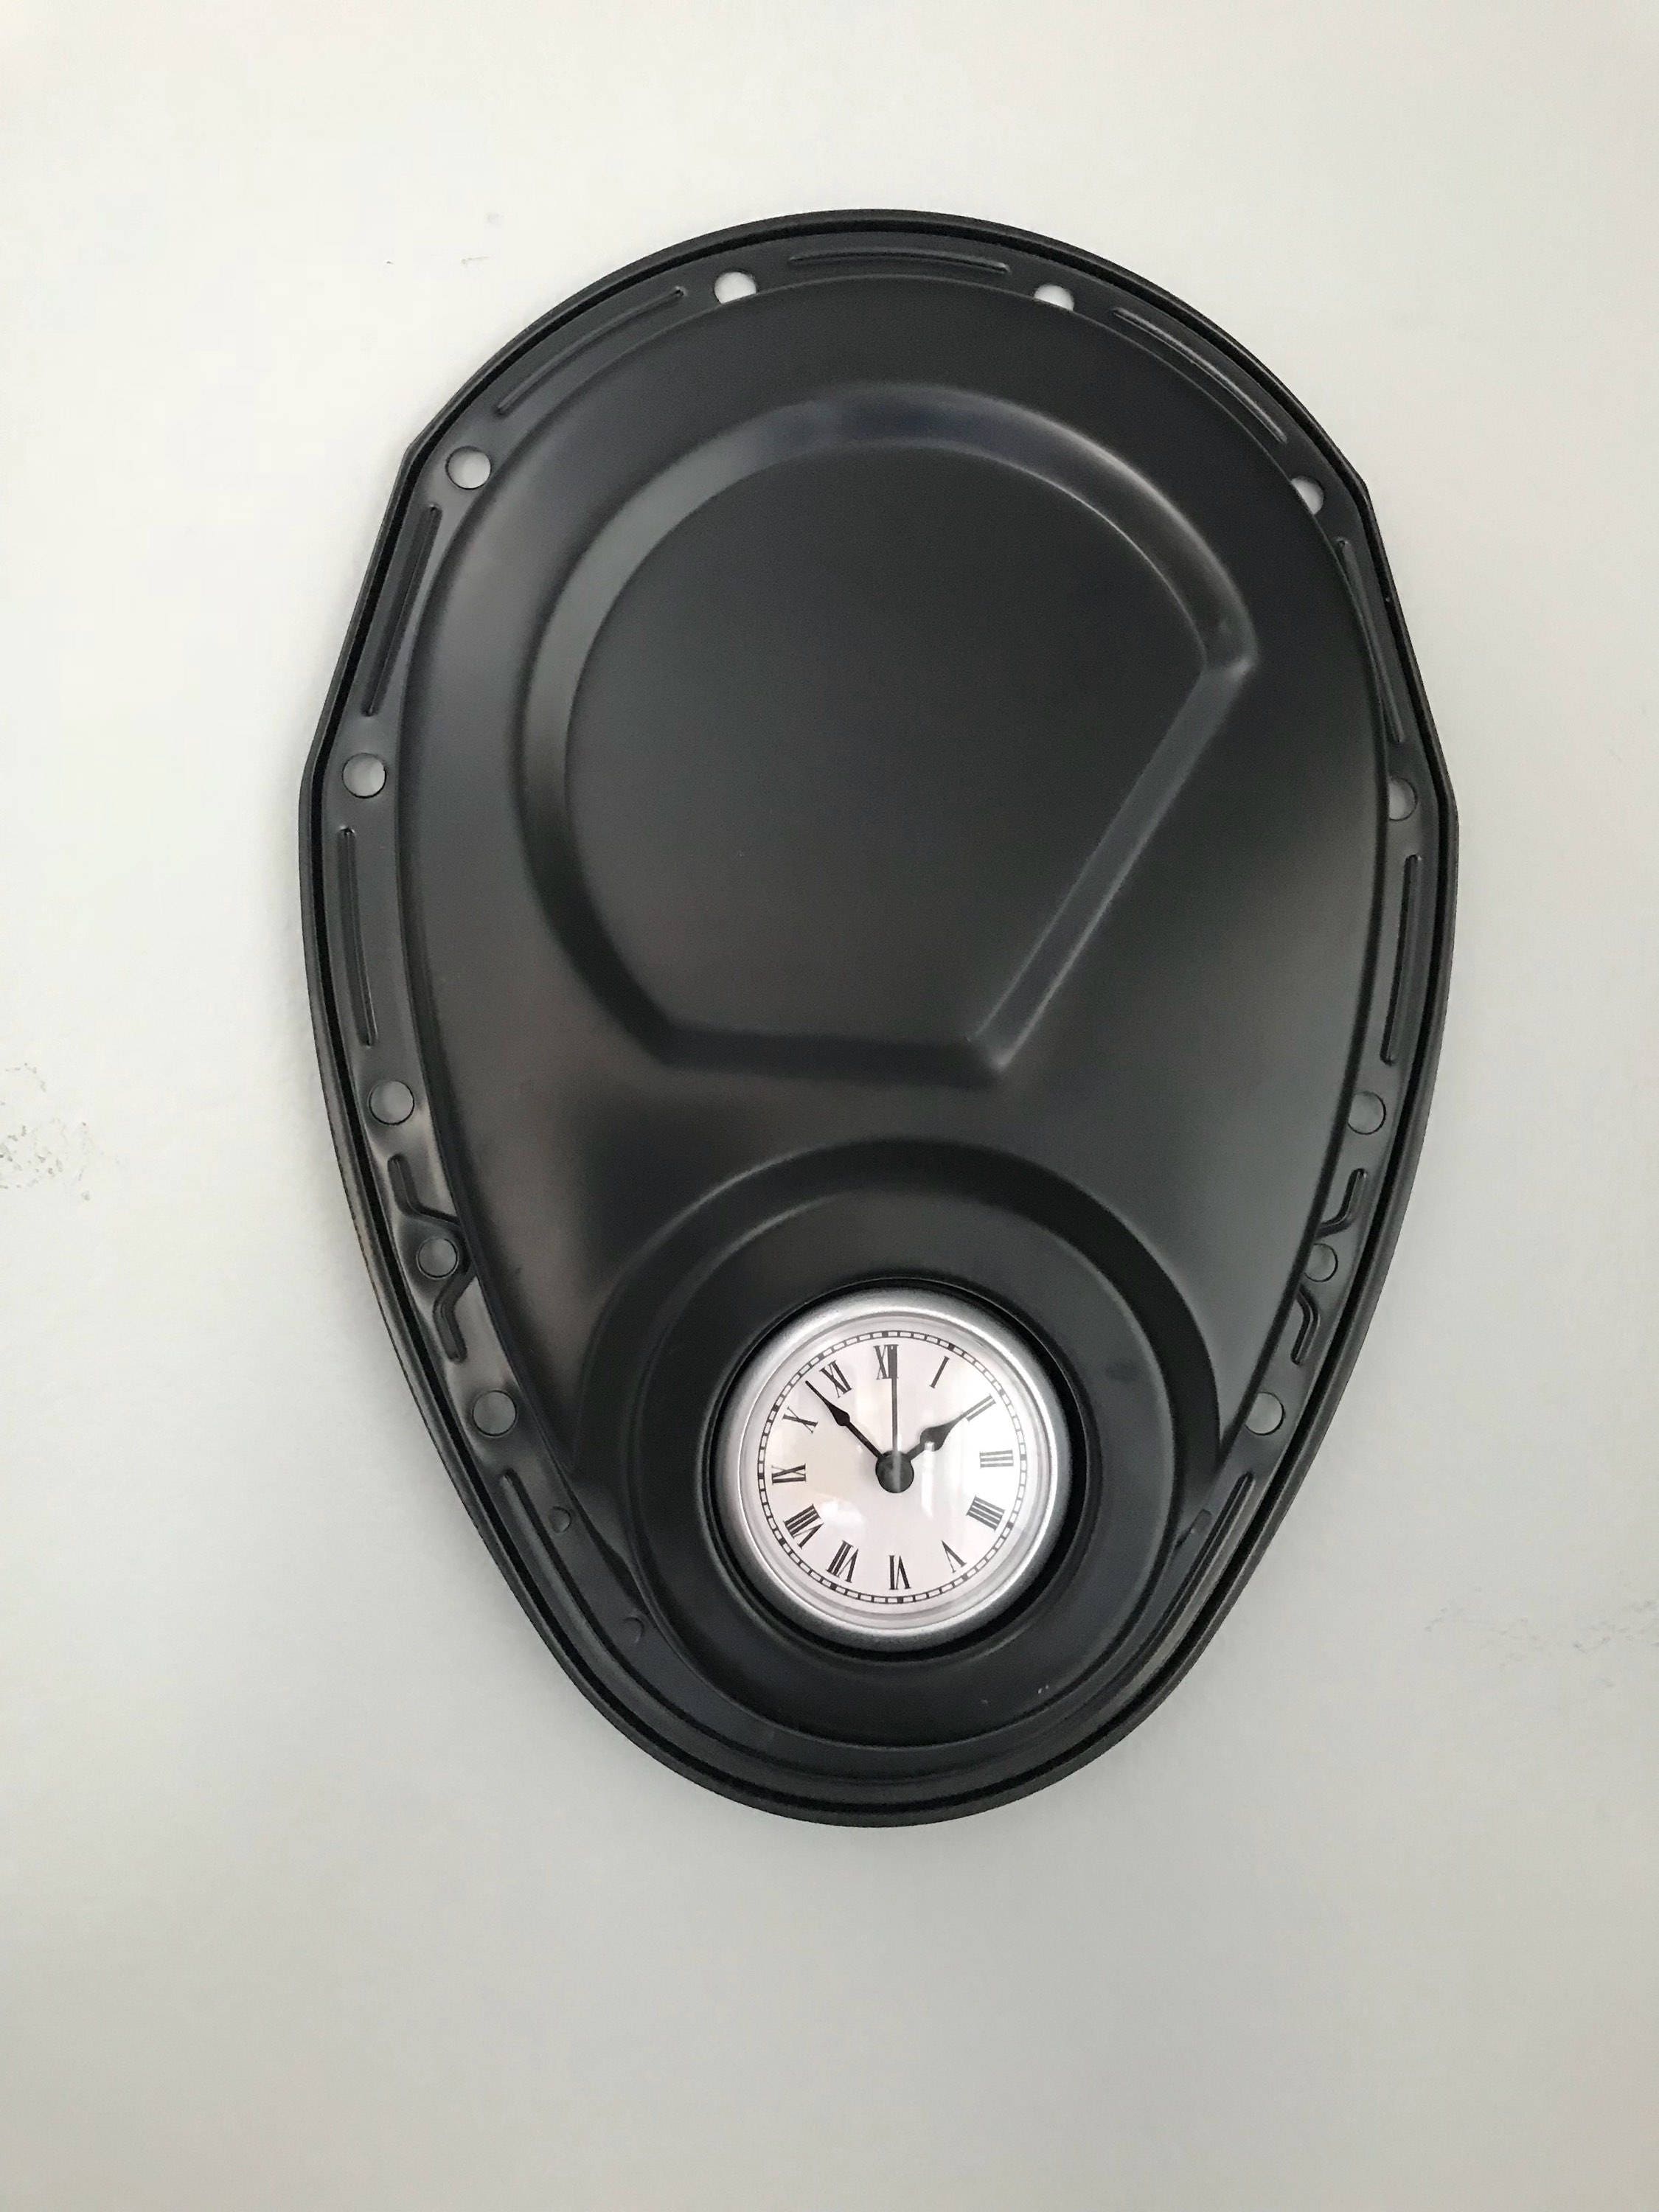 Clock made from a Chevrolet timing cover, finished in matte black.